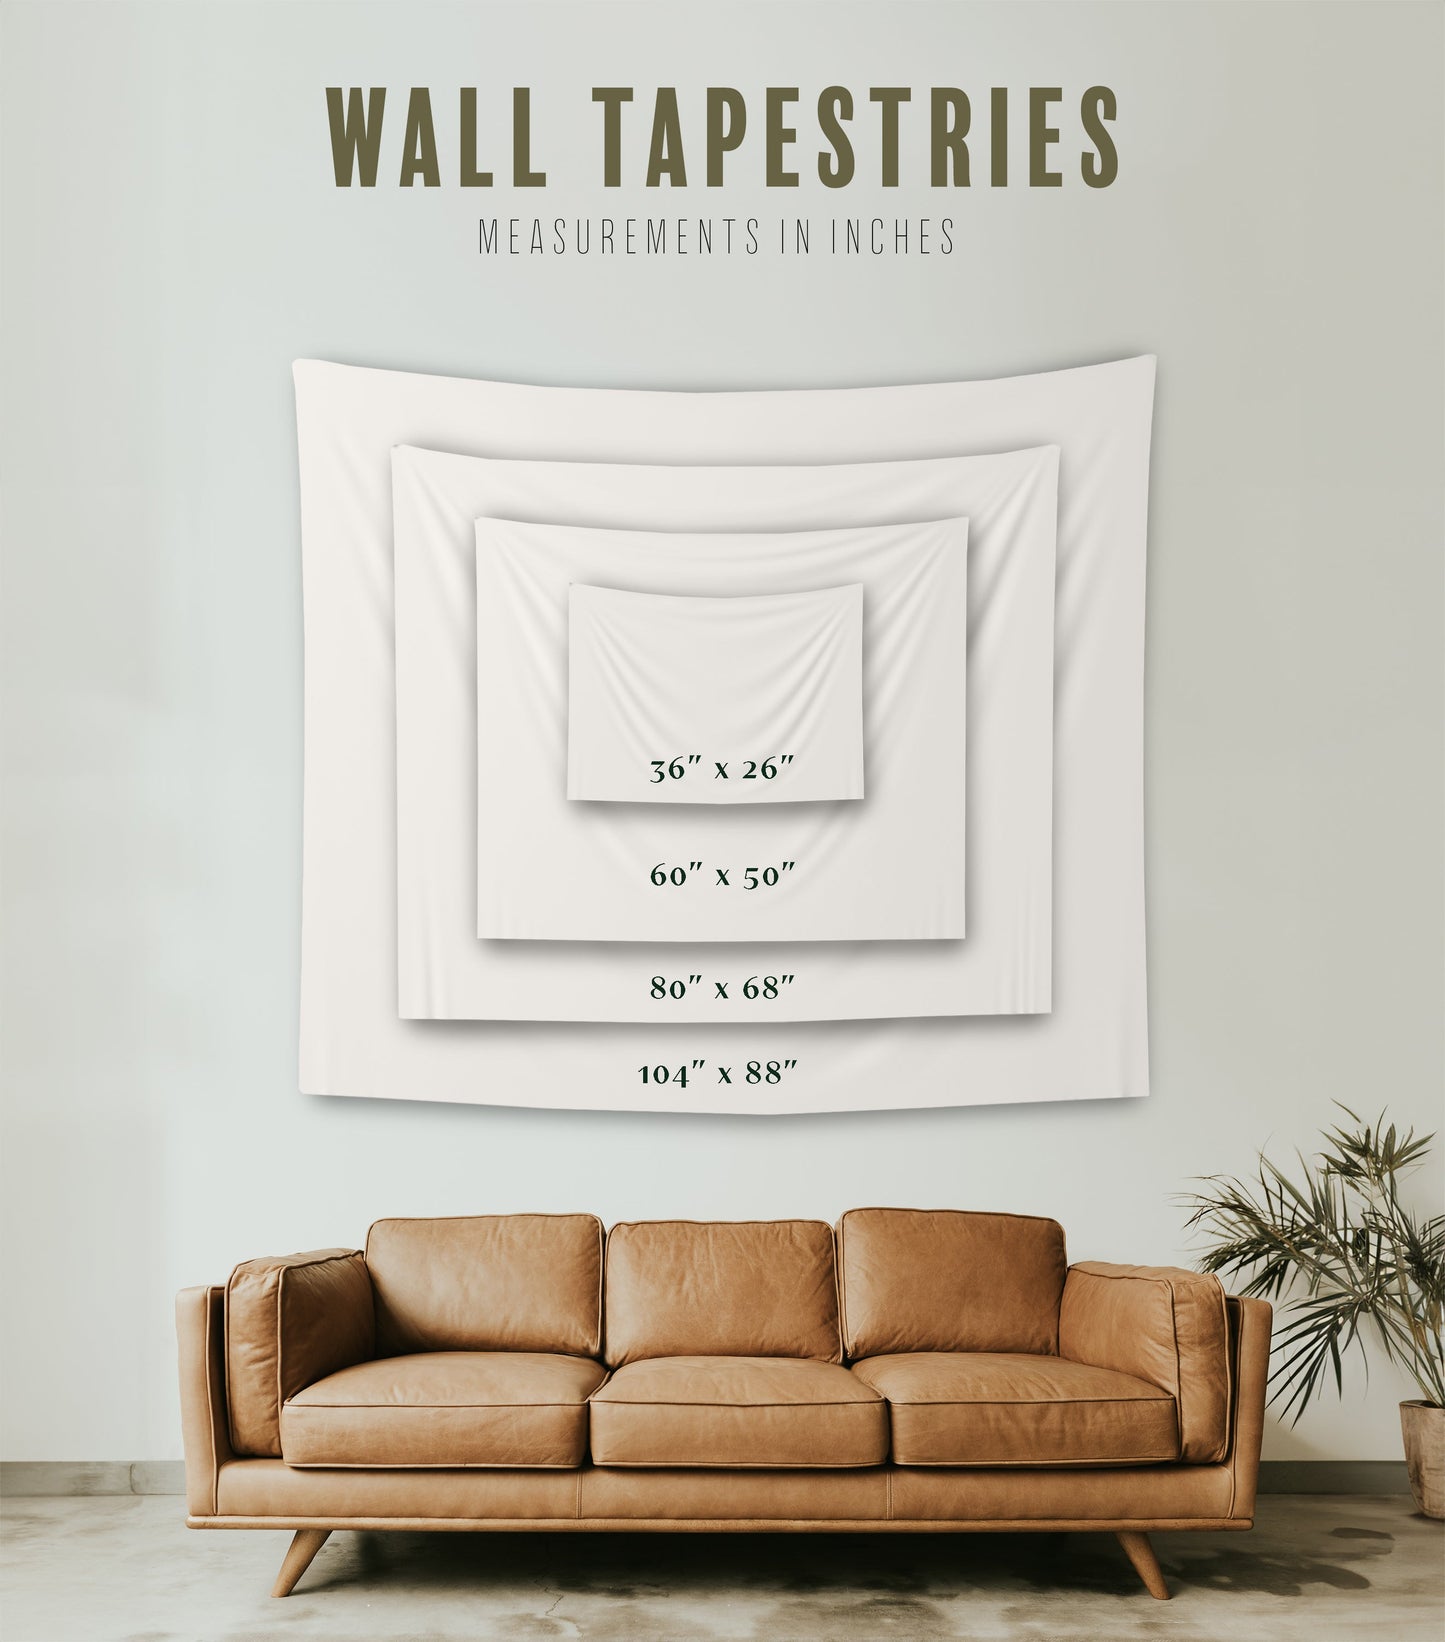 Navy Necromancer Hanging Wall Tapestries MysMuse - Premium Hanging Wall Tapestries from MysMuse - Just $25.99! Shop now at Mysterious Muse